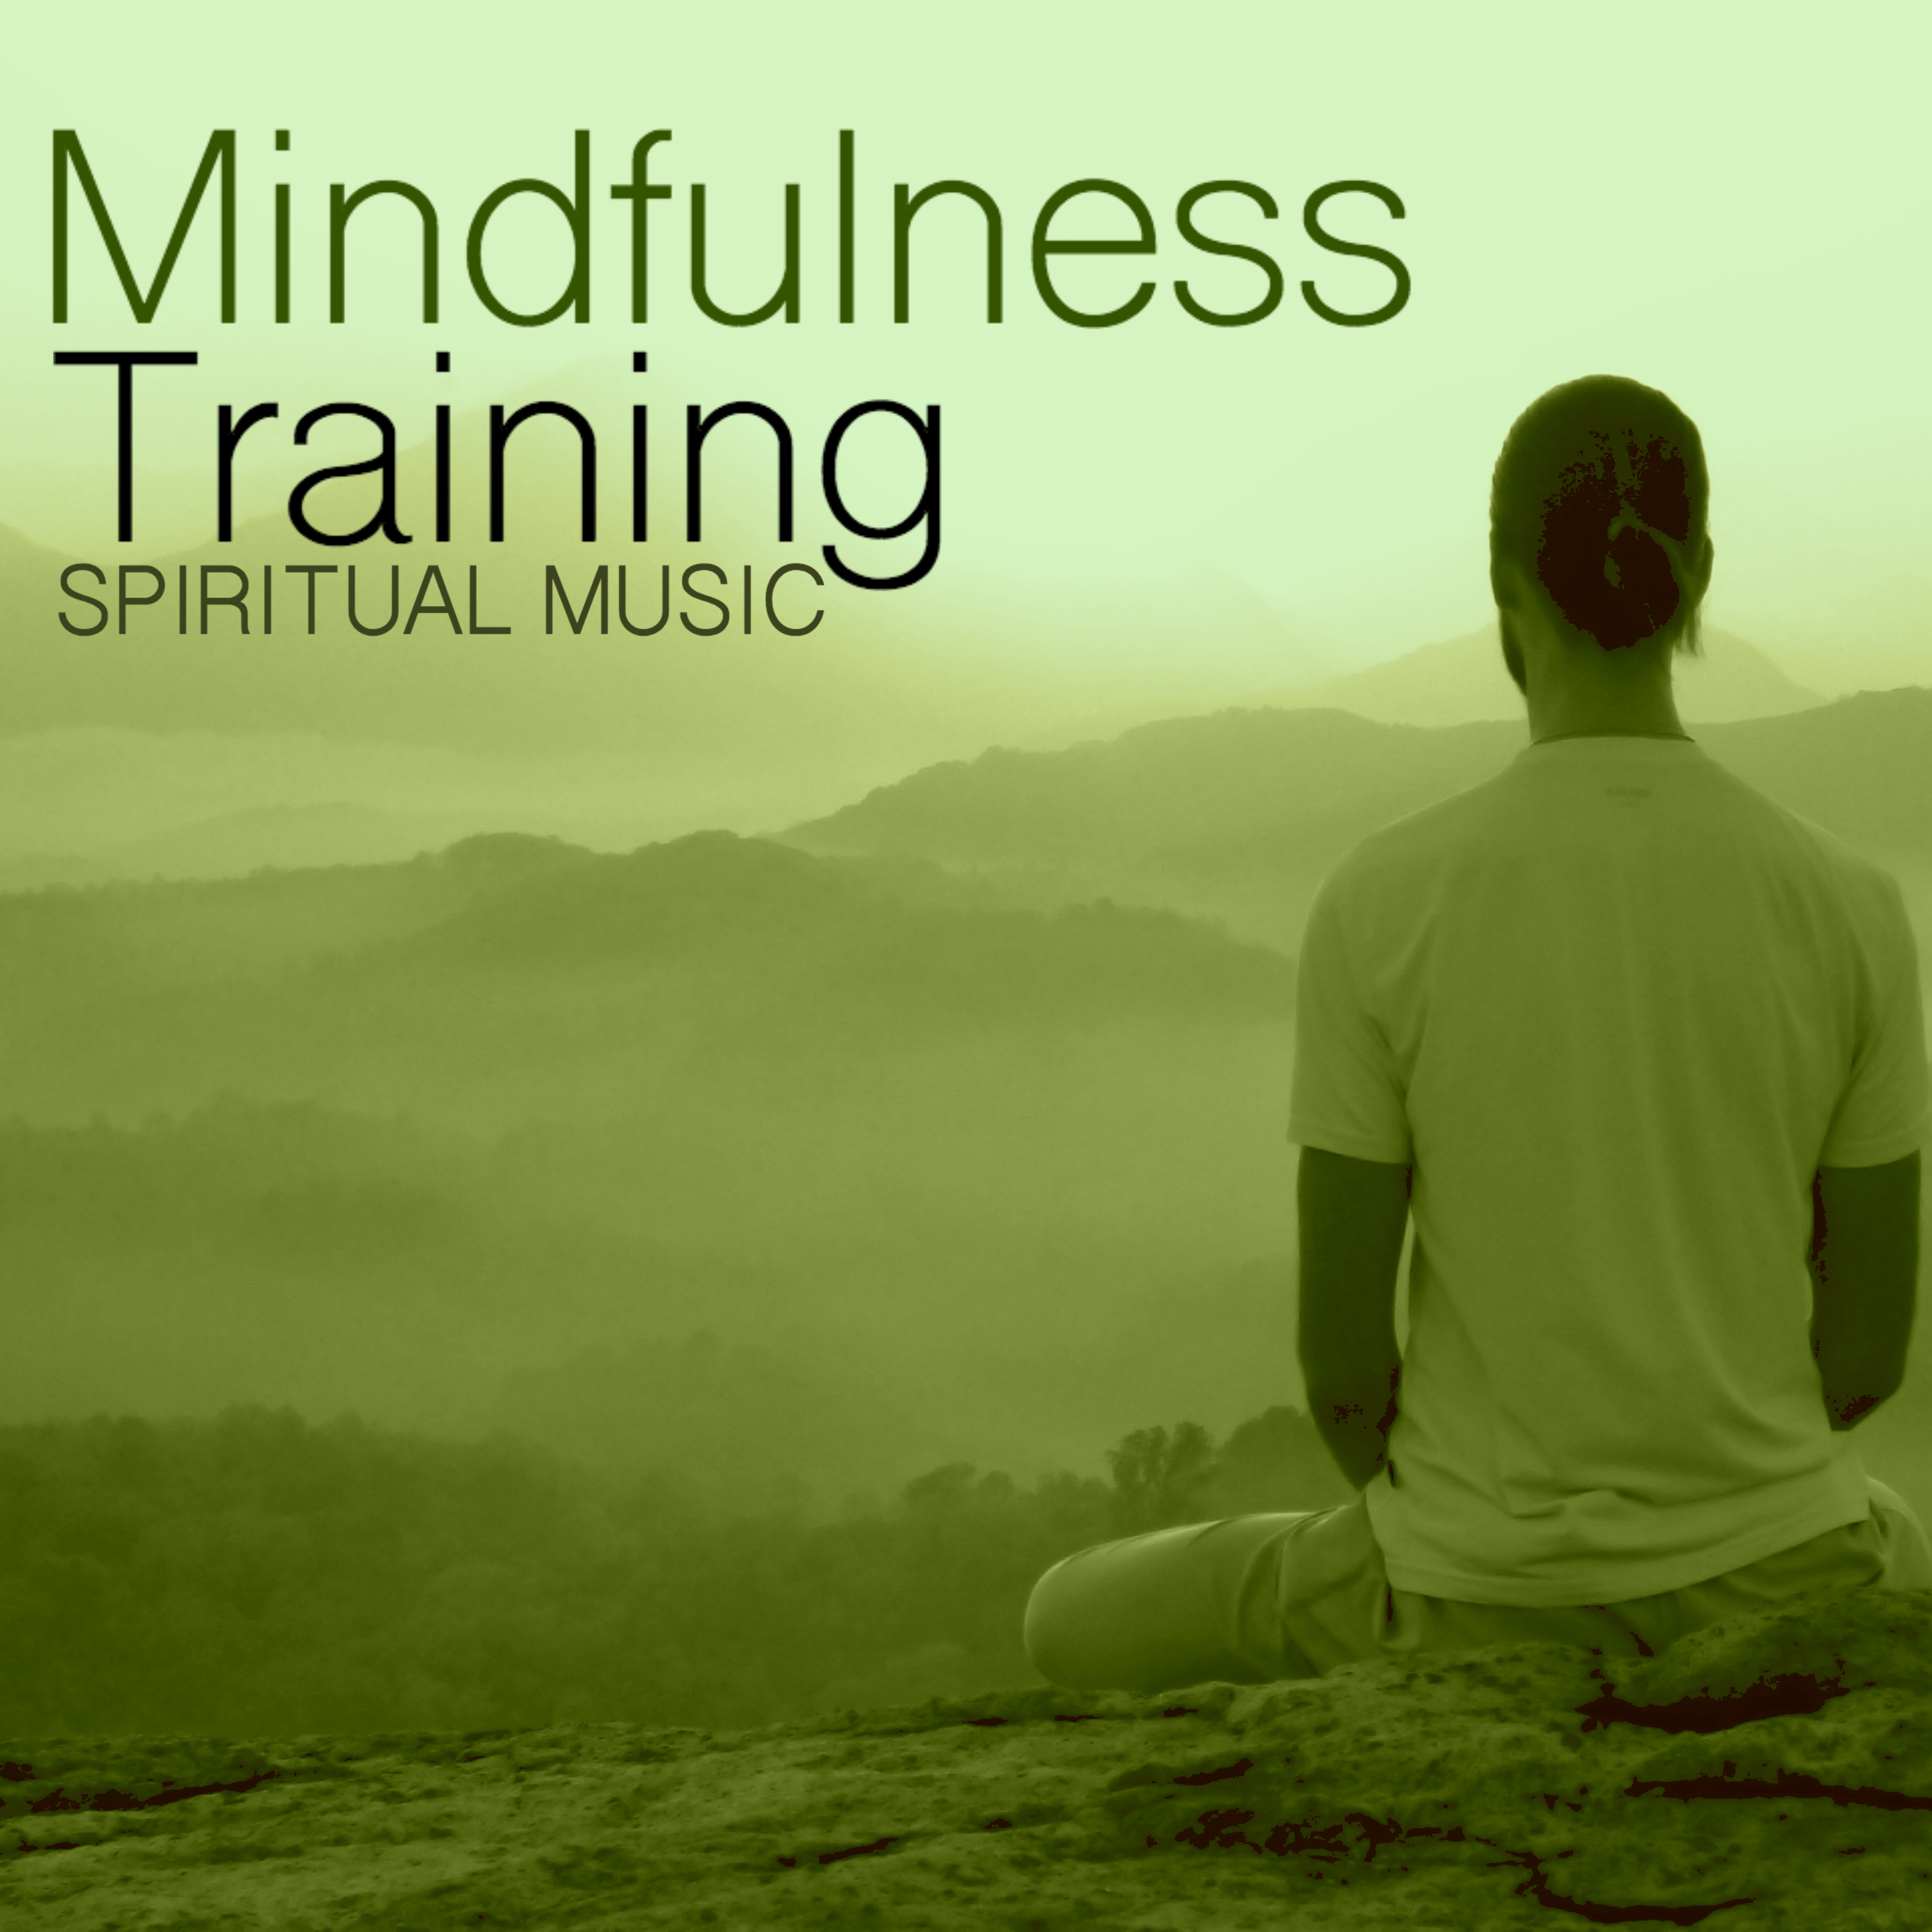 Mindfulness Training - Take a Break from Work with Spiritual Music to Relax & Heal